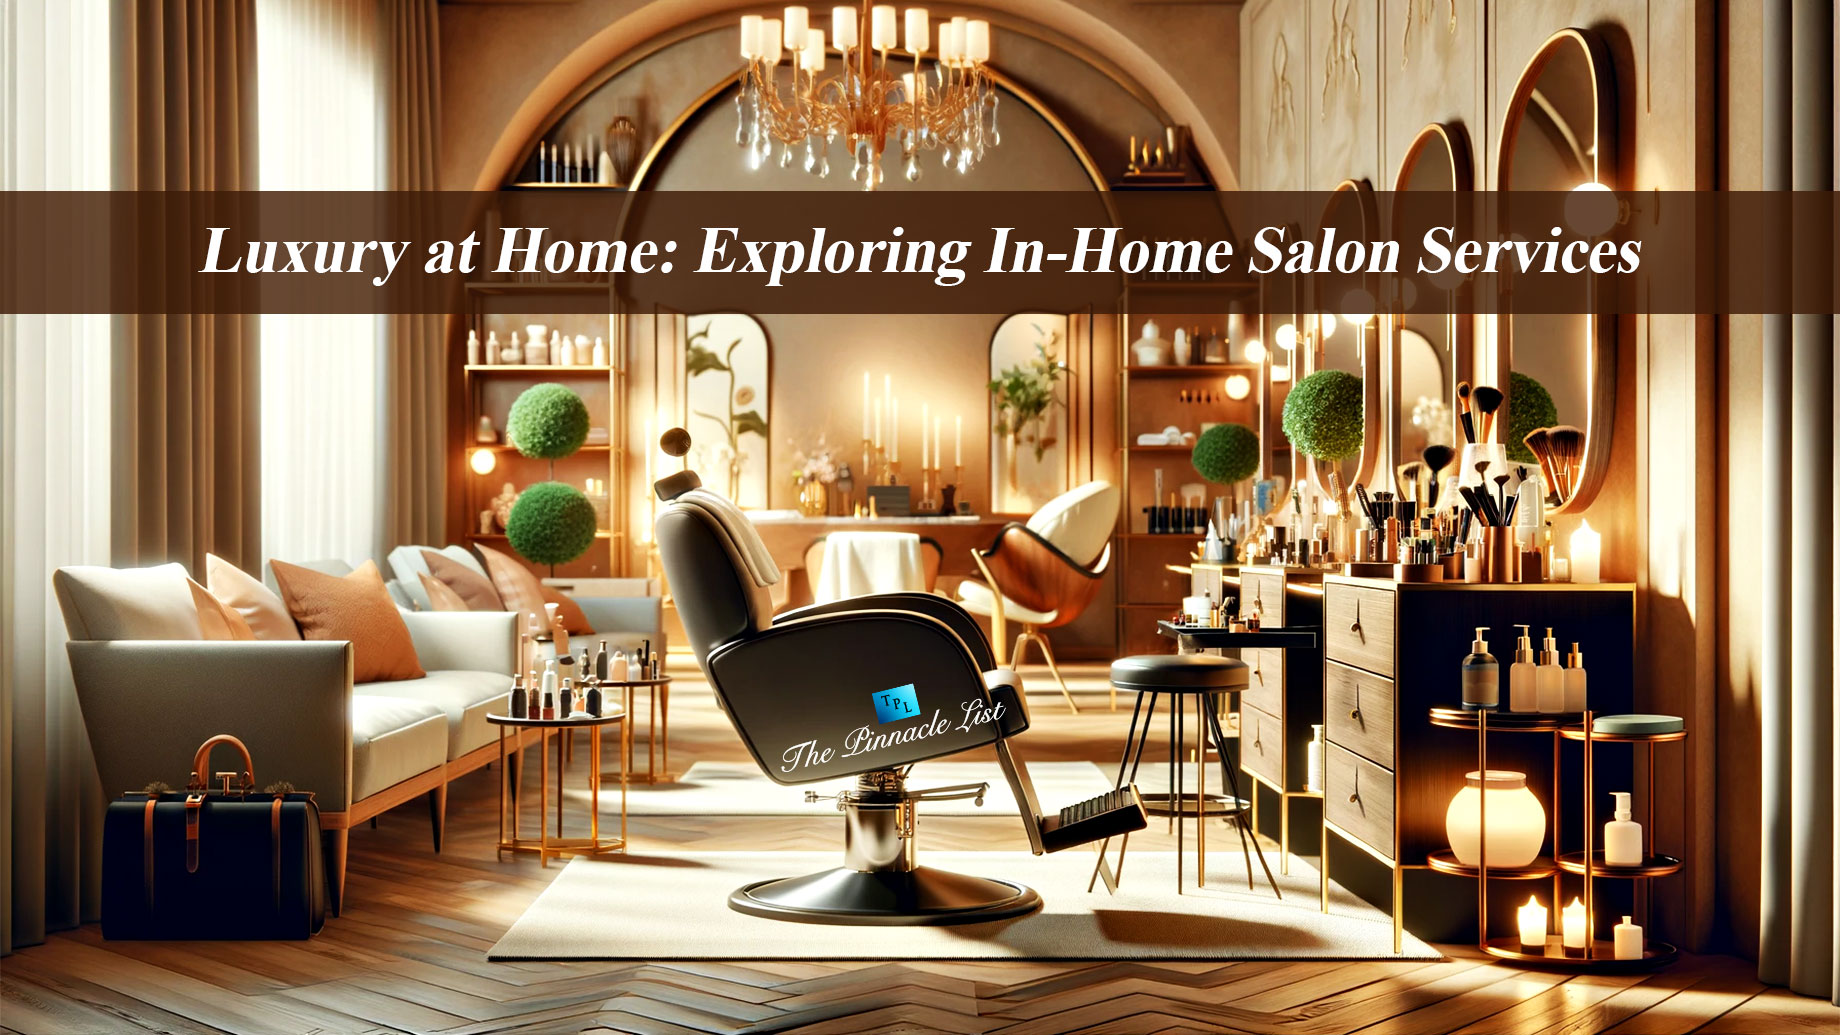 Luxury at Home: Exploring In-Home Salon Services